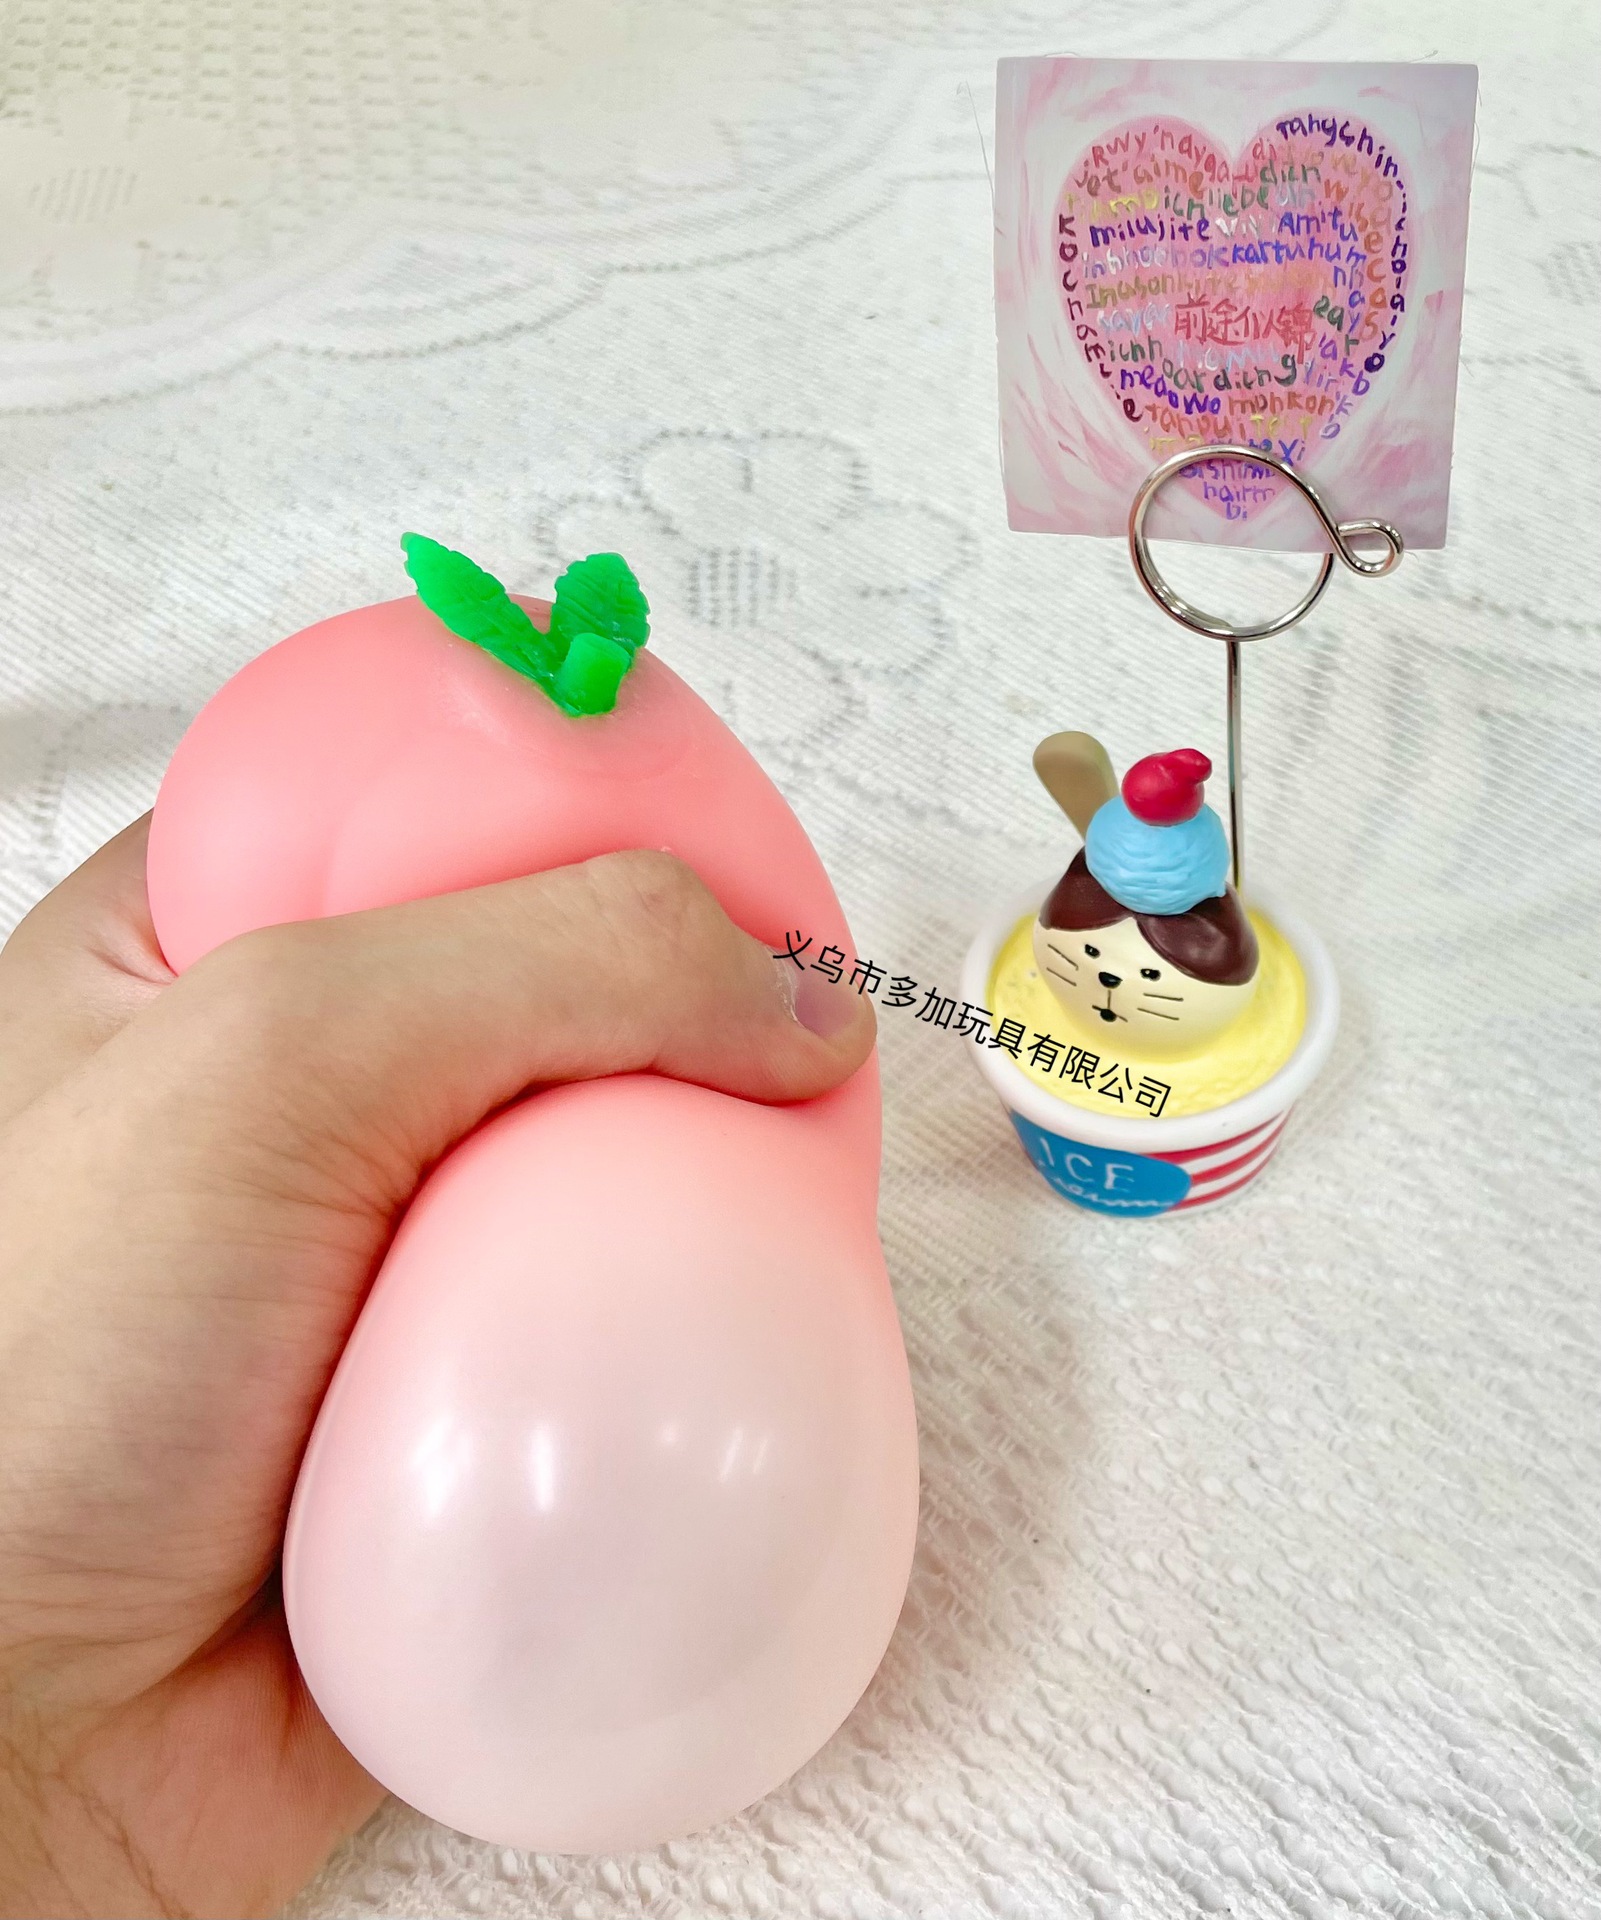 a Peach Squeezing Toy Simulation Food Nice Color Candy Toy Vent Ball Kitchen Play House Toys Children Happy